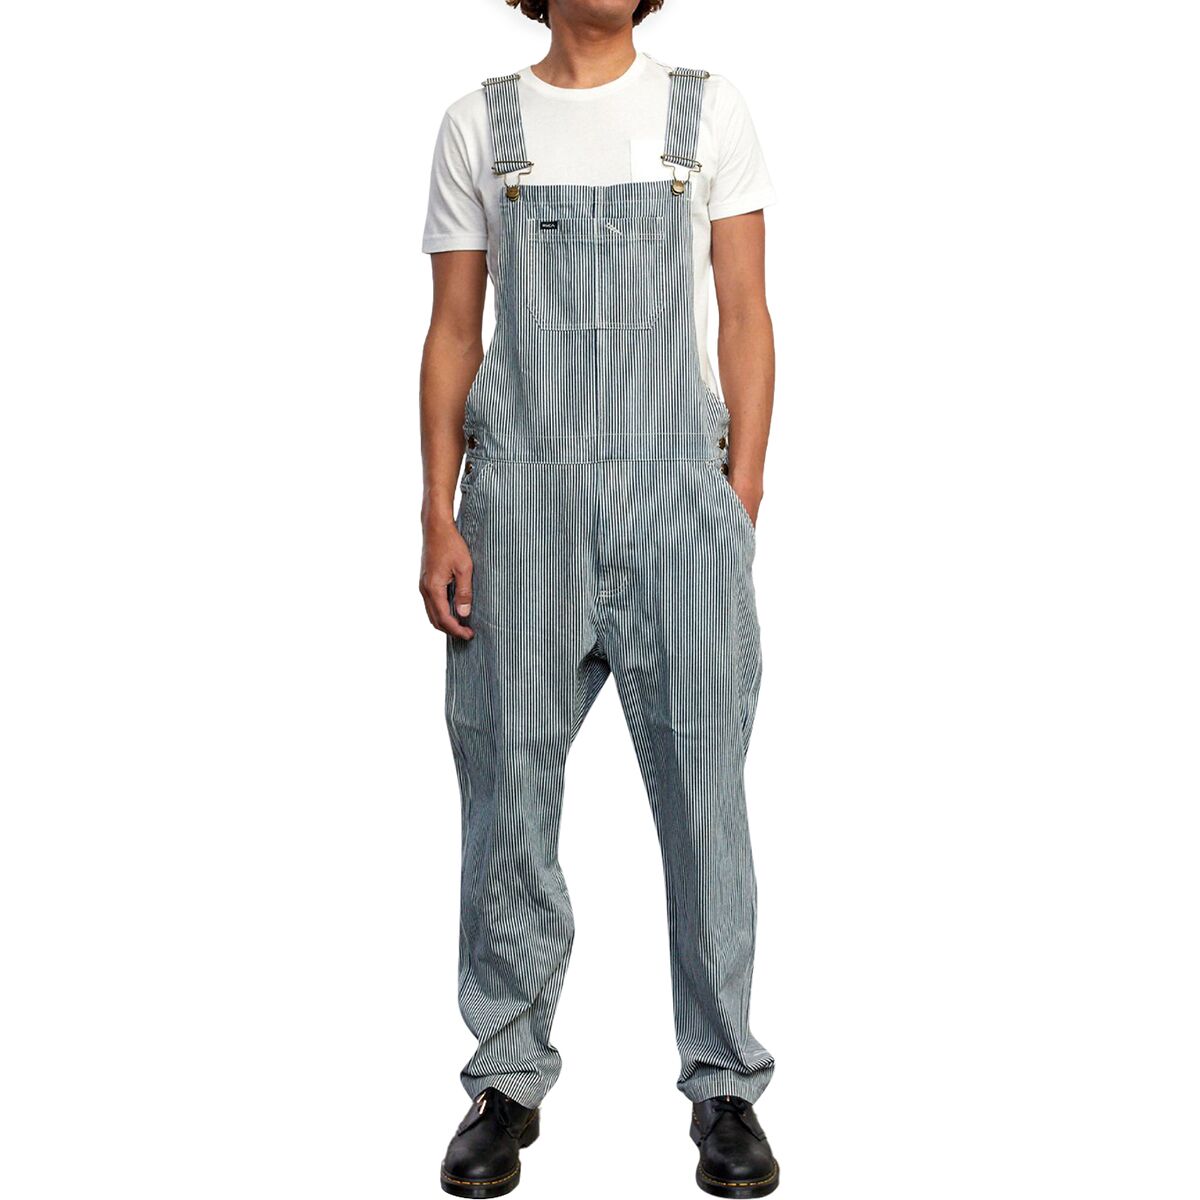 RVCA Chainmail Overall - Men's